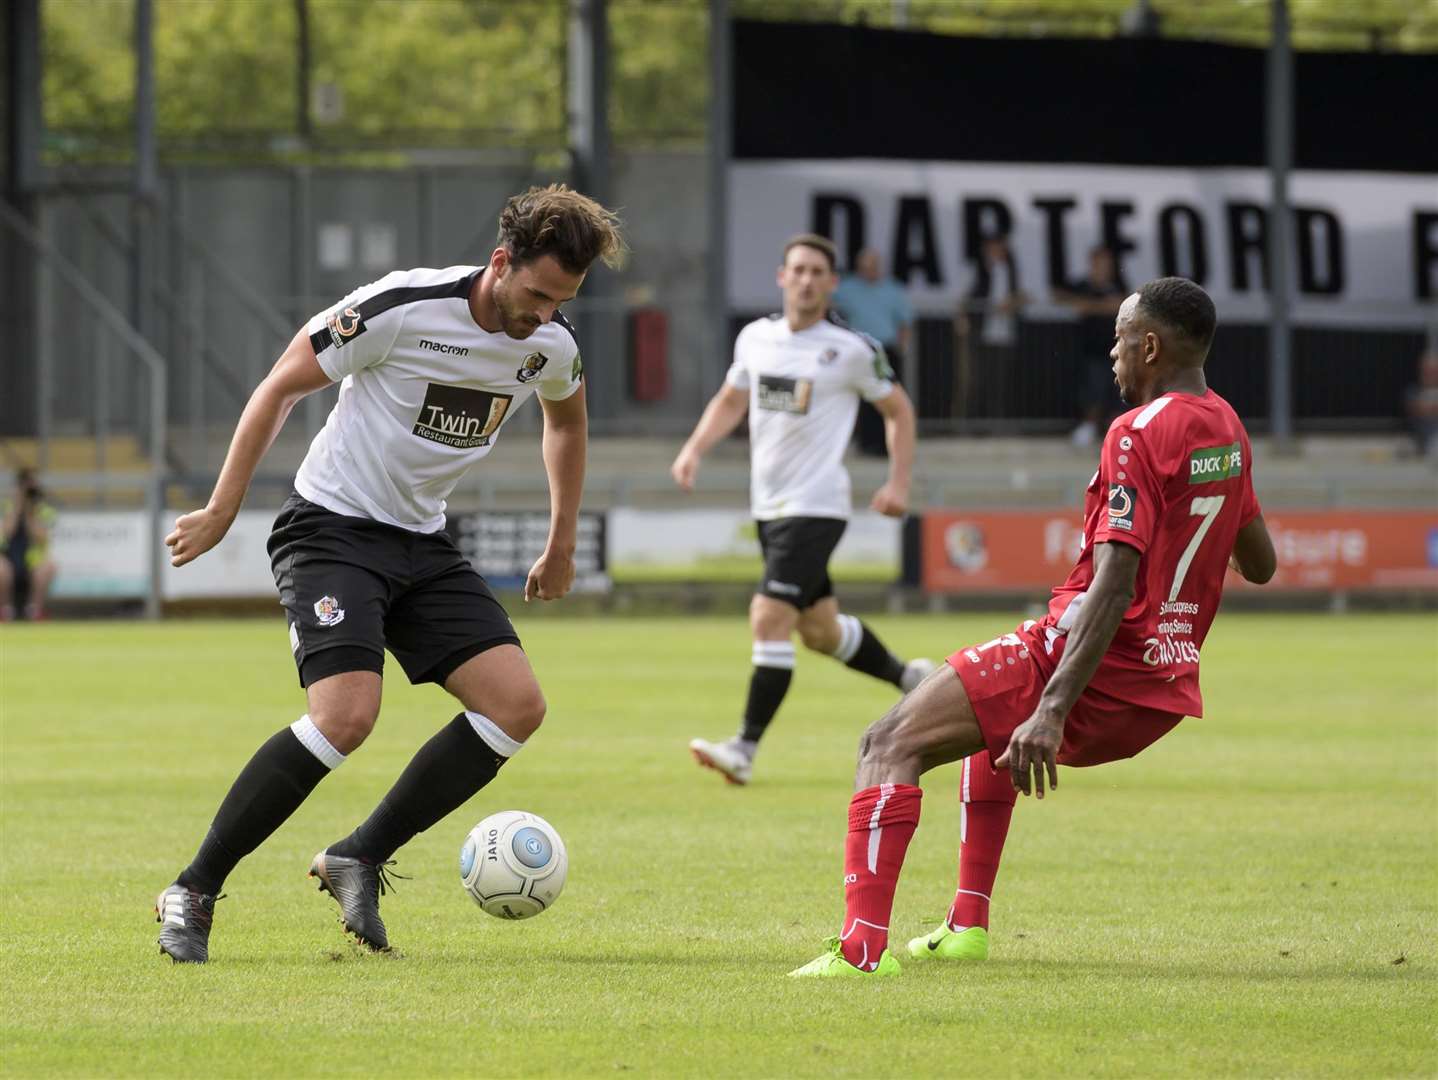 Ronnie Vint well forward on the ball. Dartford FC (white) vs Hemel Hempstead, National League South football action from Princes Park, Dartford..Picture: Andy Payton. (3550108)